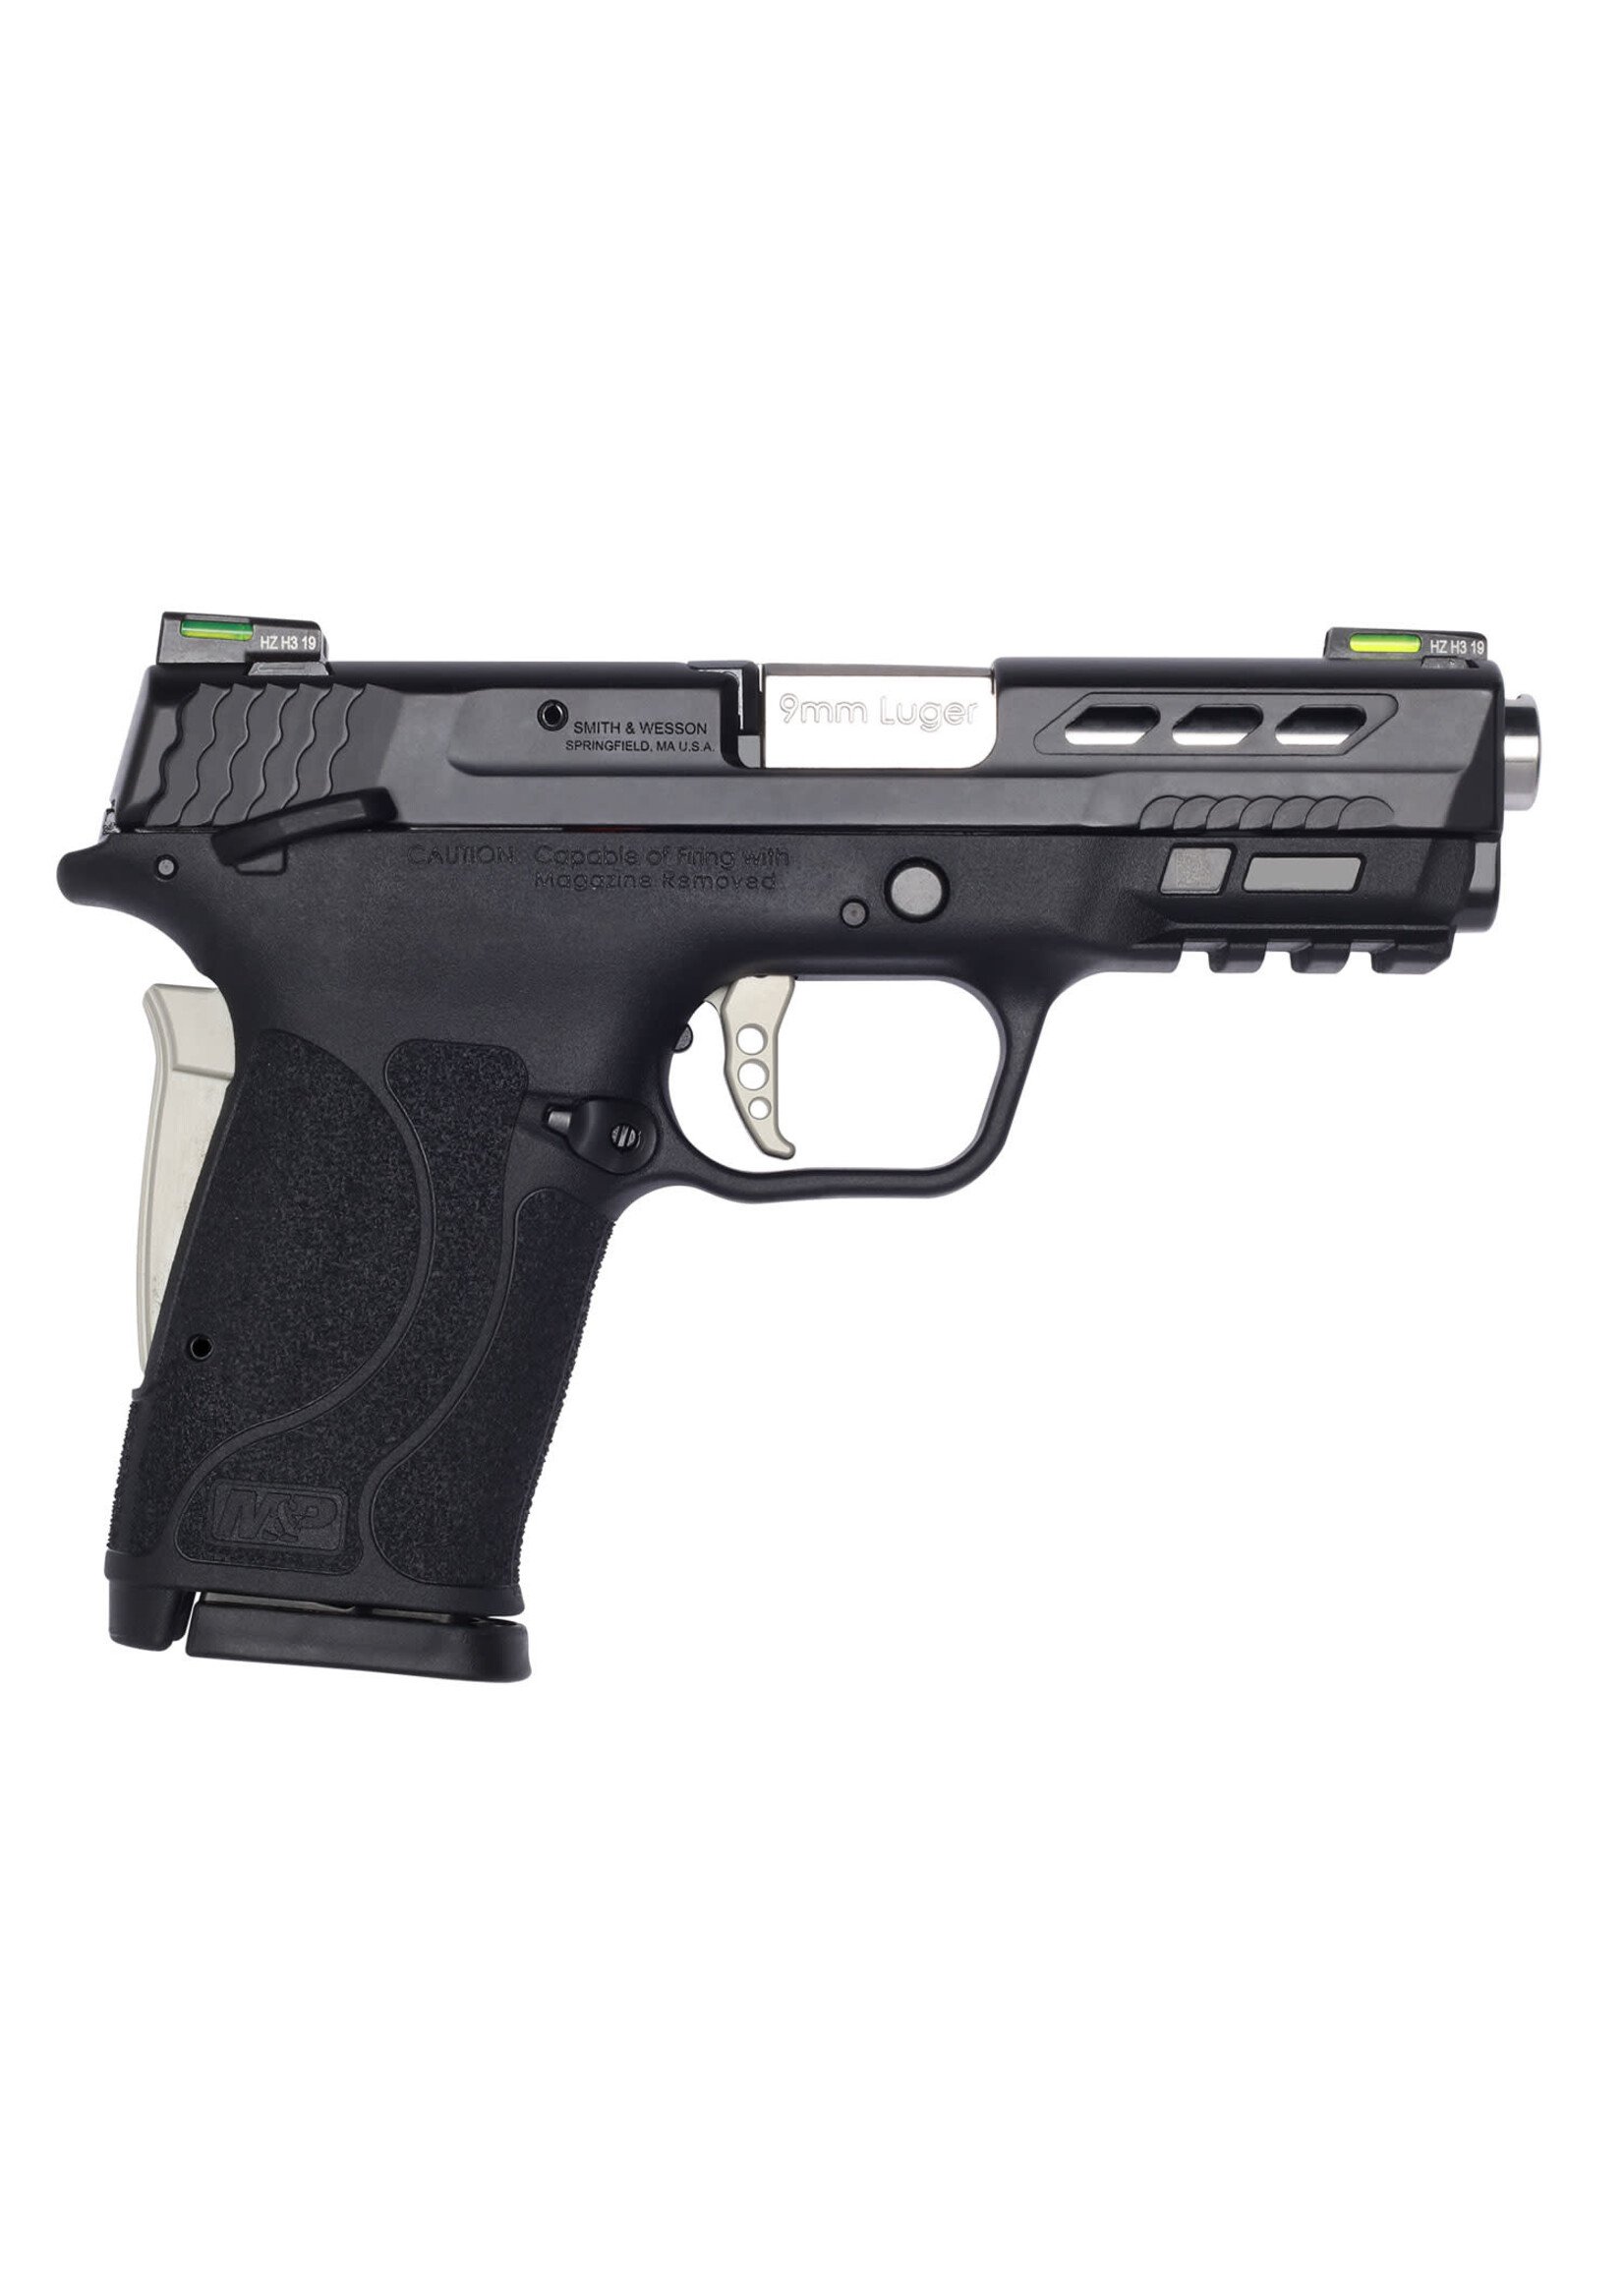 Smith and Wesson (S&W) Smith & Wesson 13225 M&P Performance Center Shield EZ M2.0 9mm Luger 3.80" Ported Barrel 8+1 Black Polymer Frame With Picatinny Acc. Rail, Lightening Cut Armornite Slide, Silver Accents, HiViz Litewave H3 Sights, Manual Safety